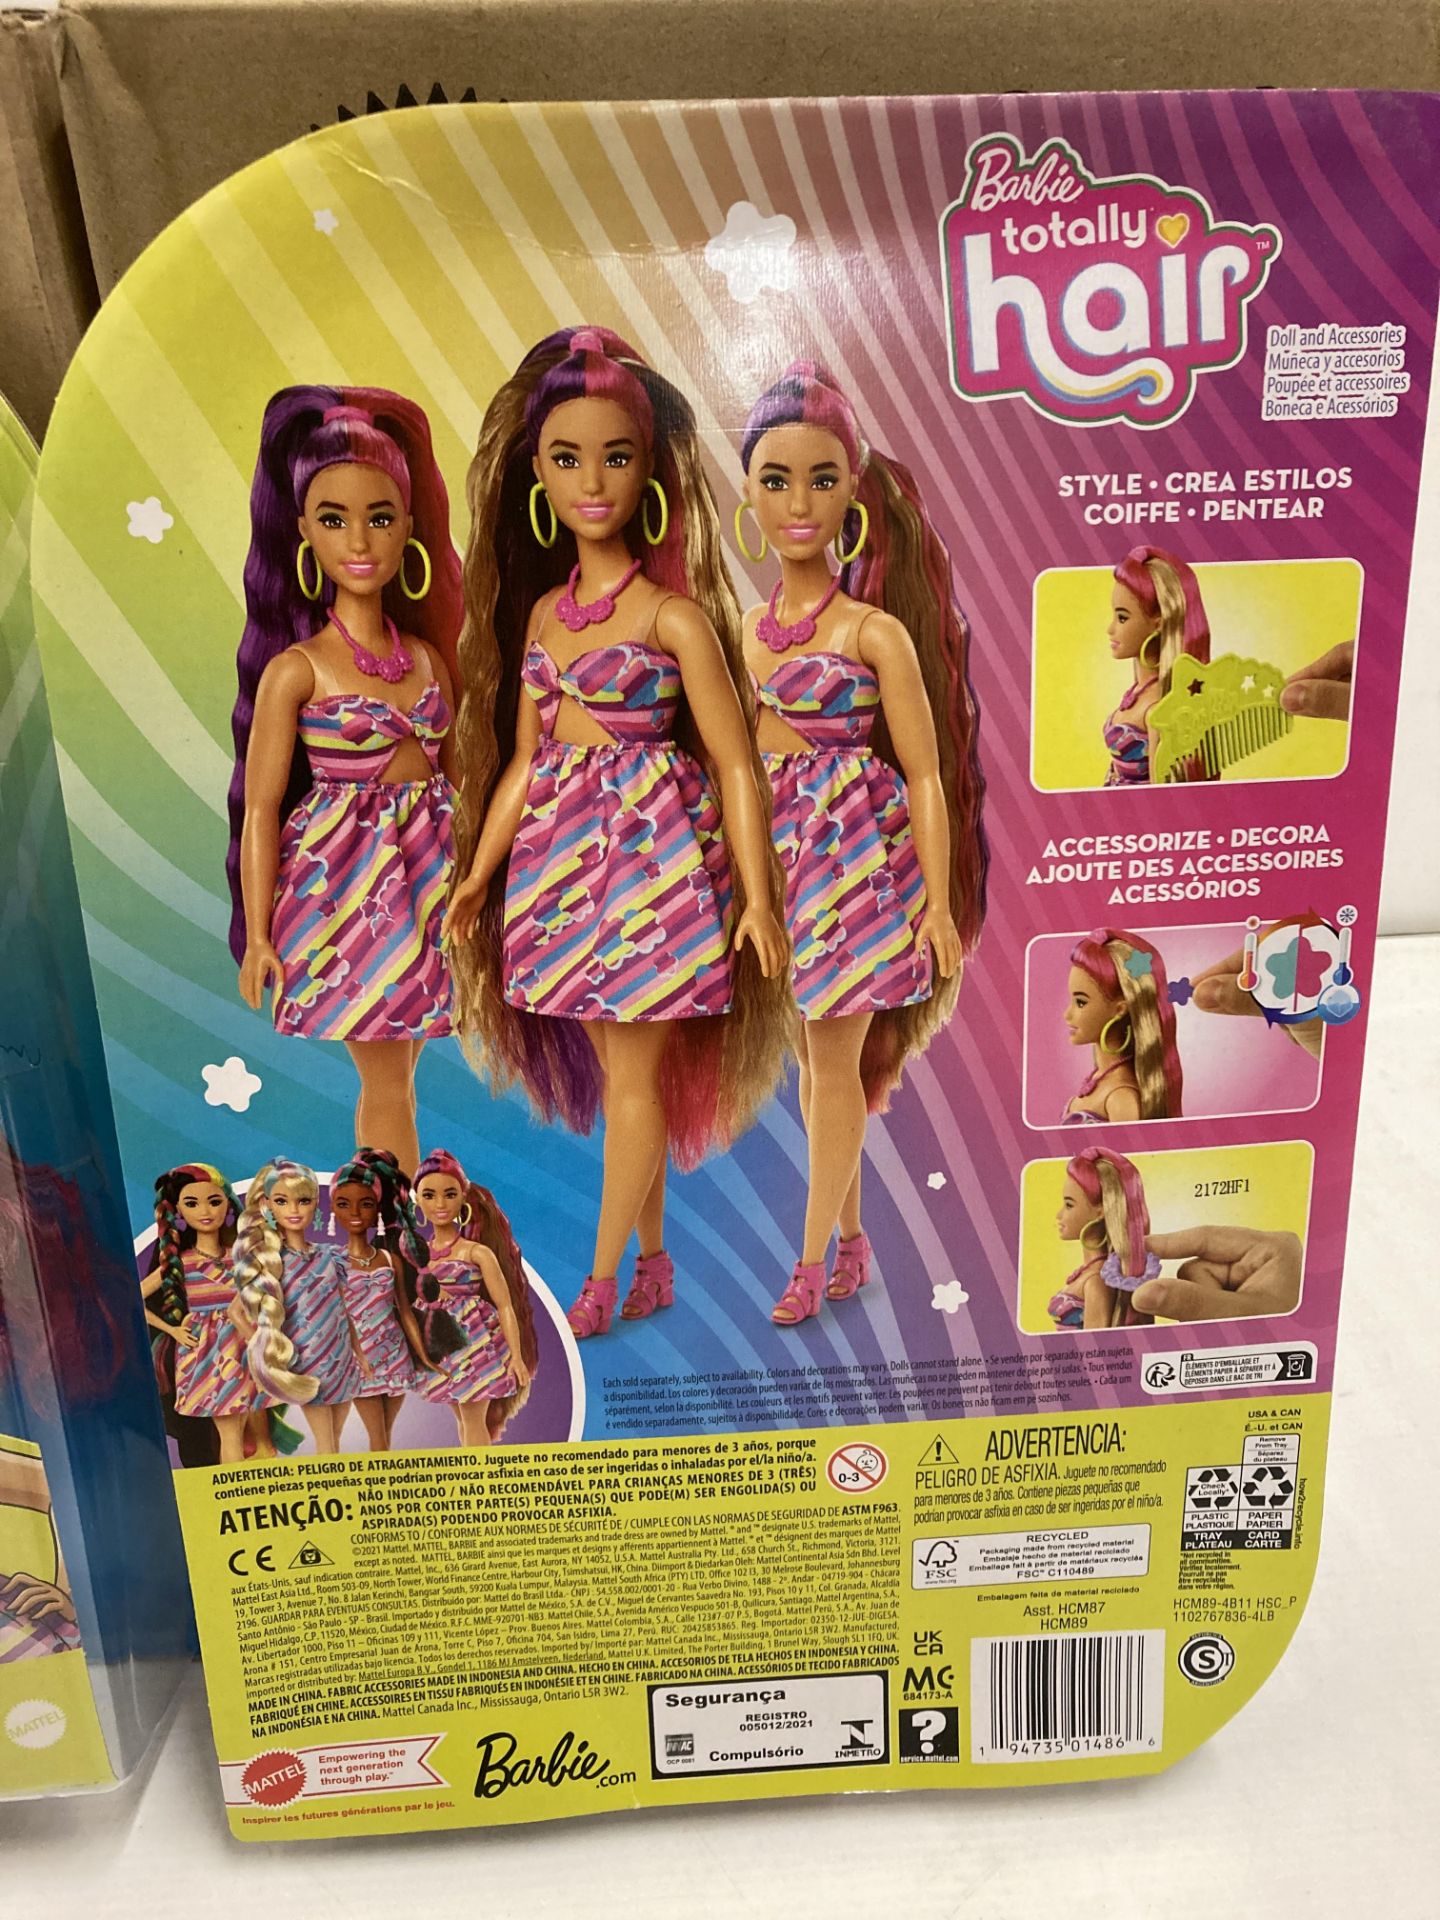 8 x Barbie Totally Hair doll and accessories (2 x outer boxes) (saleroom location: M06) - Image 3 of 3